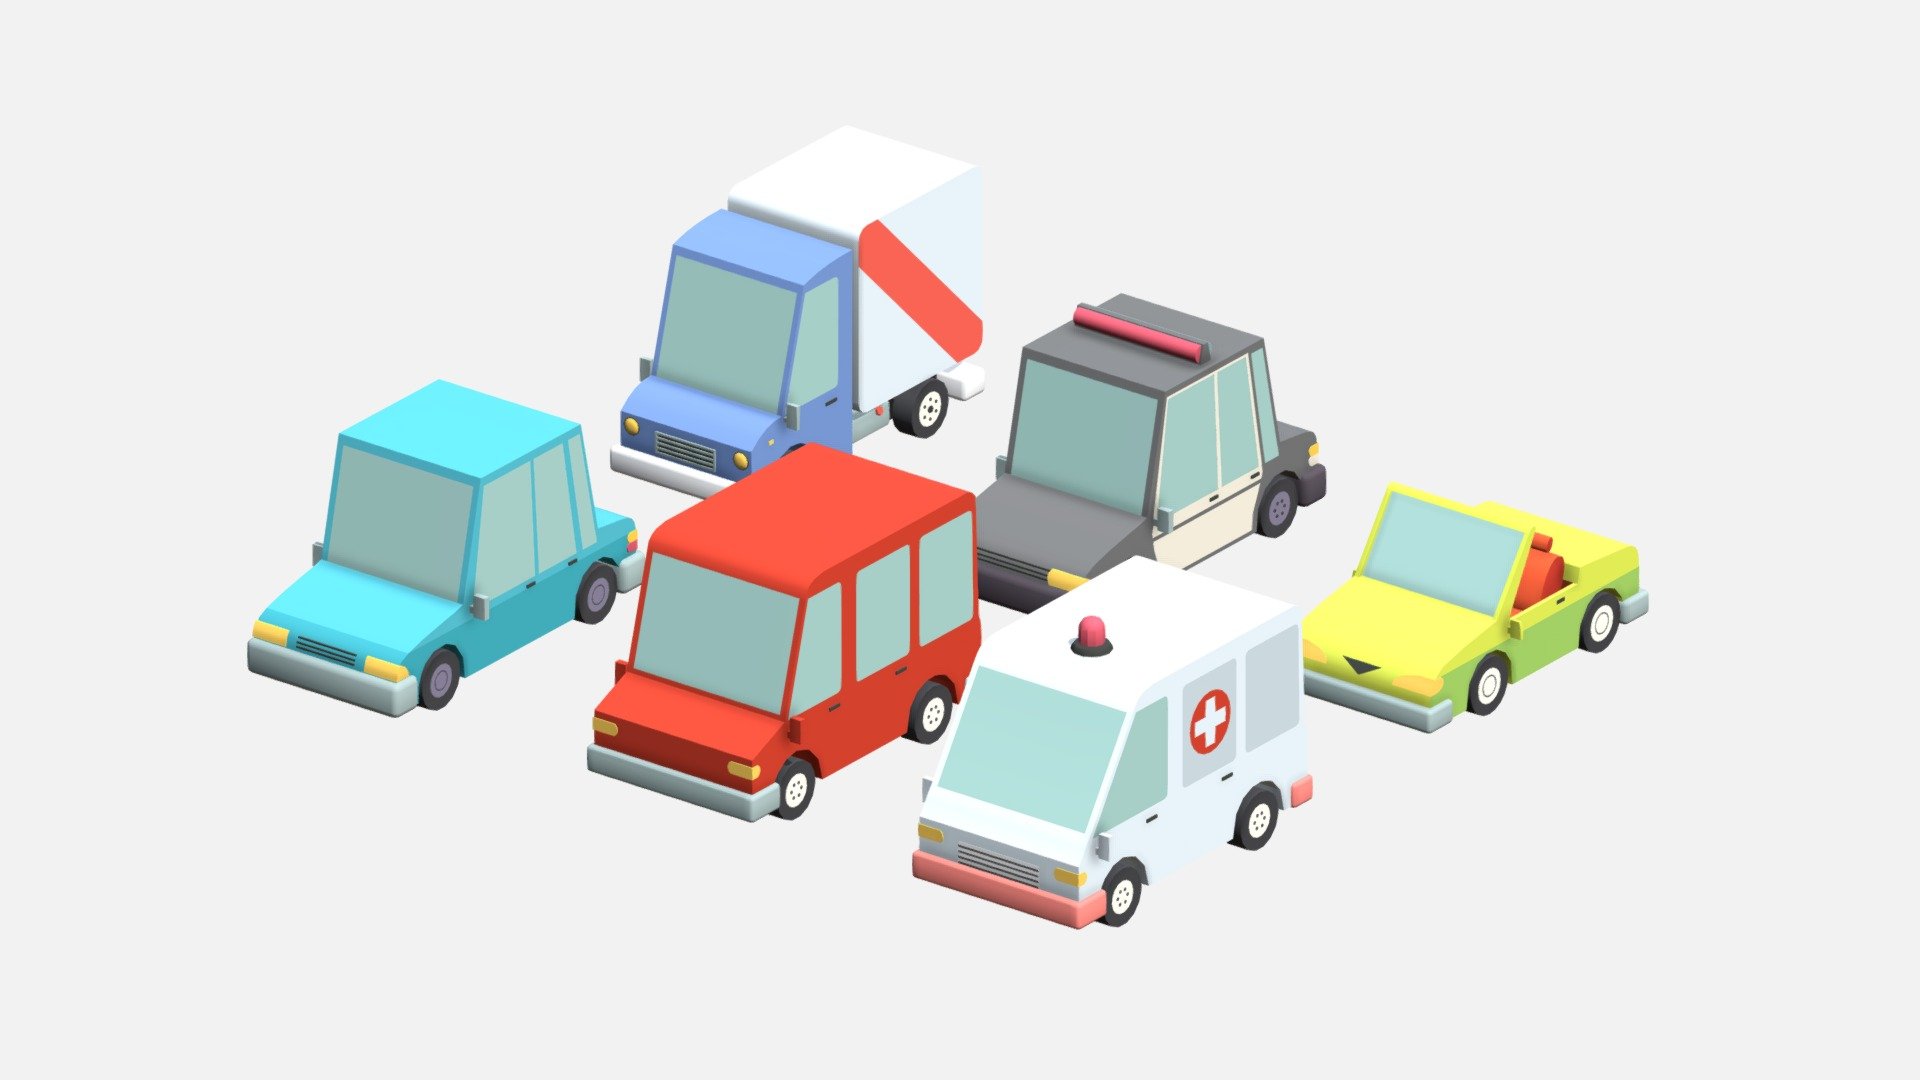 Low poly Cars pack 3D model

Geometry:   Polygonal

Polygons:   7,800

Vertices:   9,100

Textures:   No

Materials:  Yes

Rigged: No

Animated:   No - Low poly Cars pack 3D model - 3D model by yelaman.arts (@elamanbolushan) 3d model